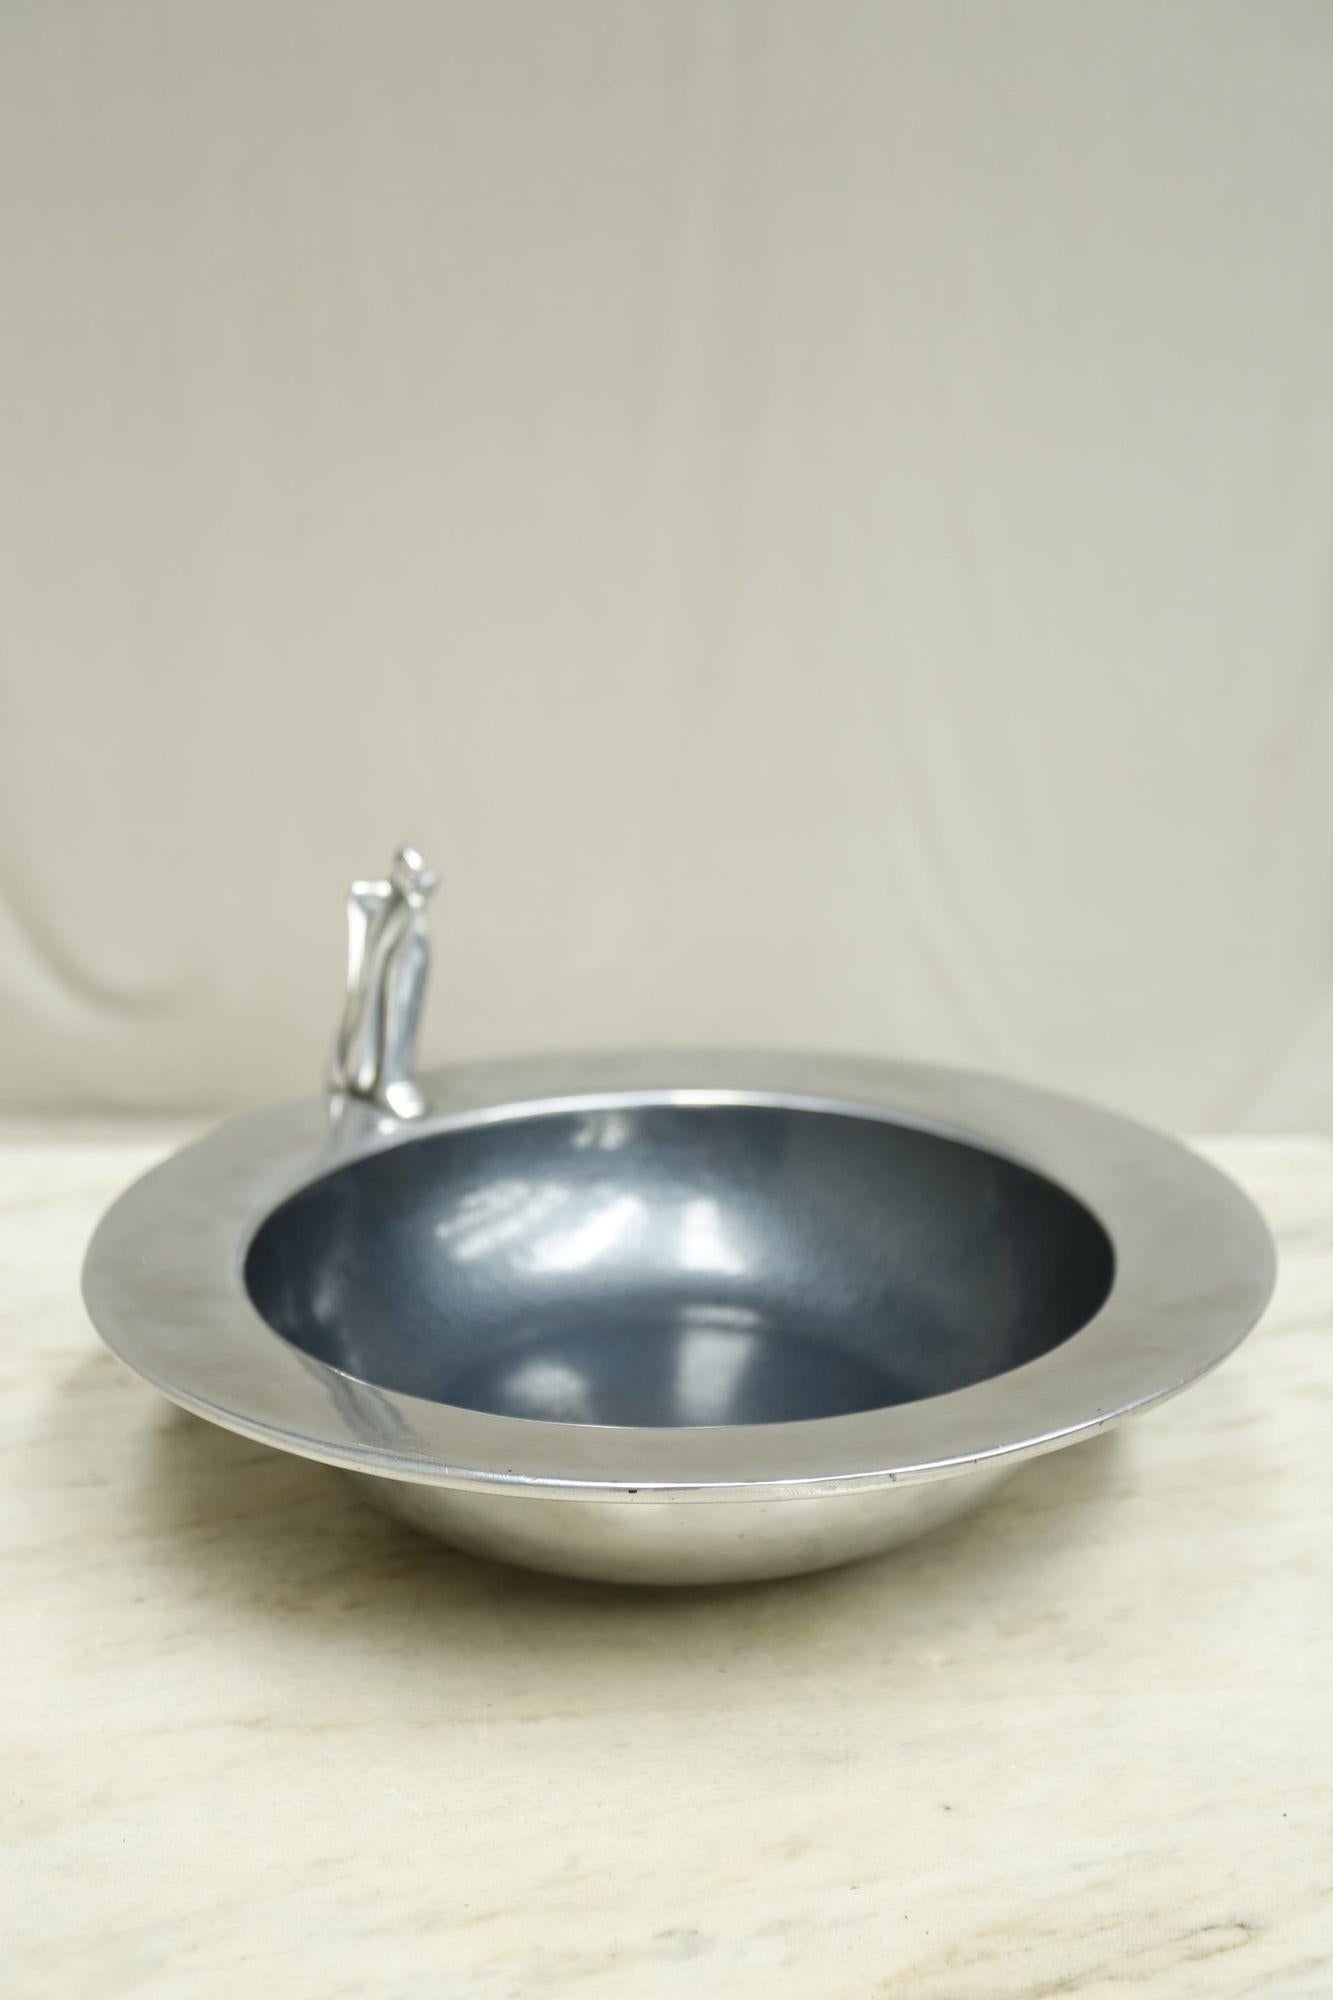 This is a wonderful quality 20th century pewter bowl by renowned pewter artist Carrol Boyes. This example featured a polished edge with beaten interior and this is mirrored on the underside. It then has a figure sat on the side as if it was going to